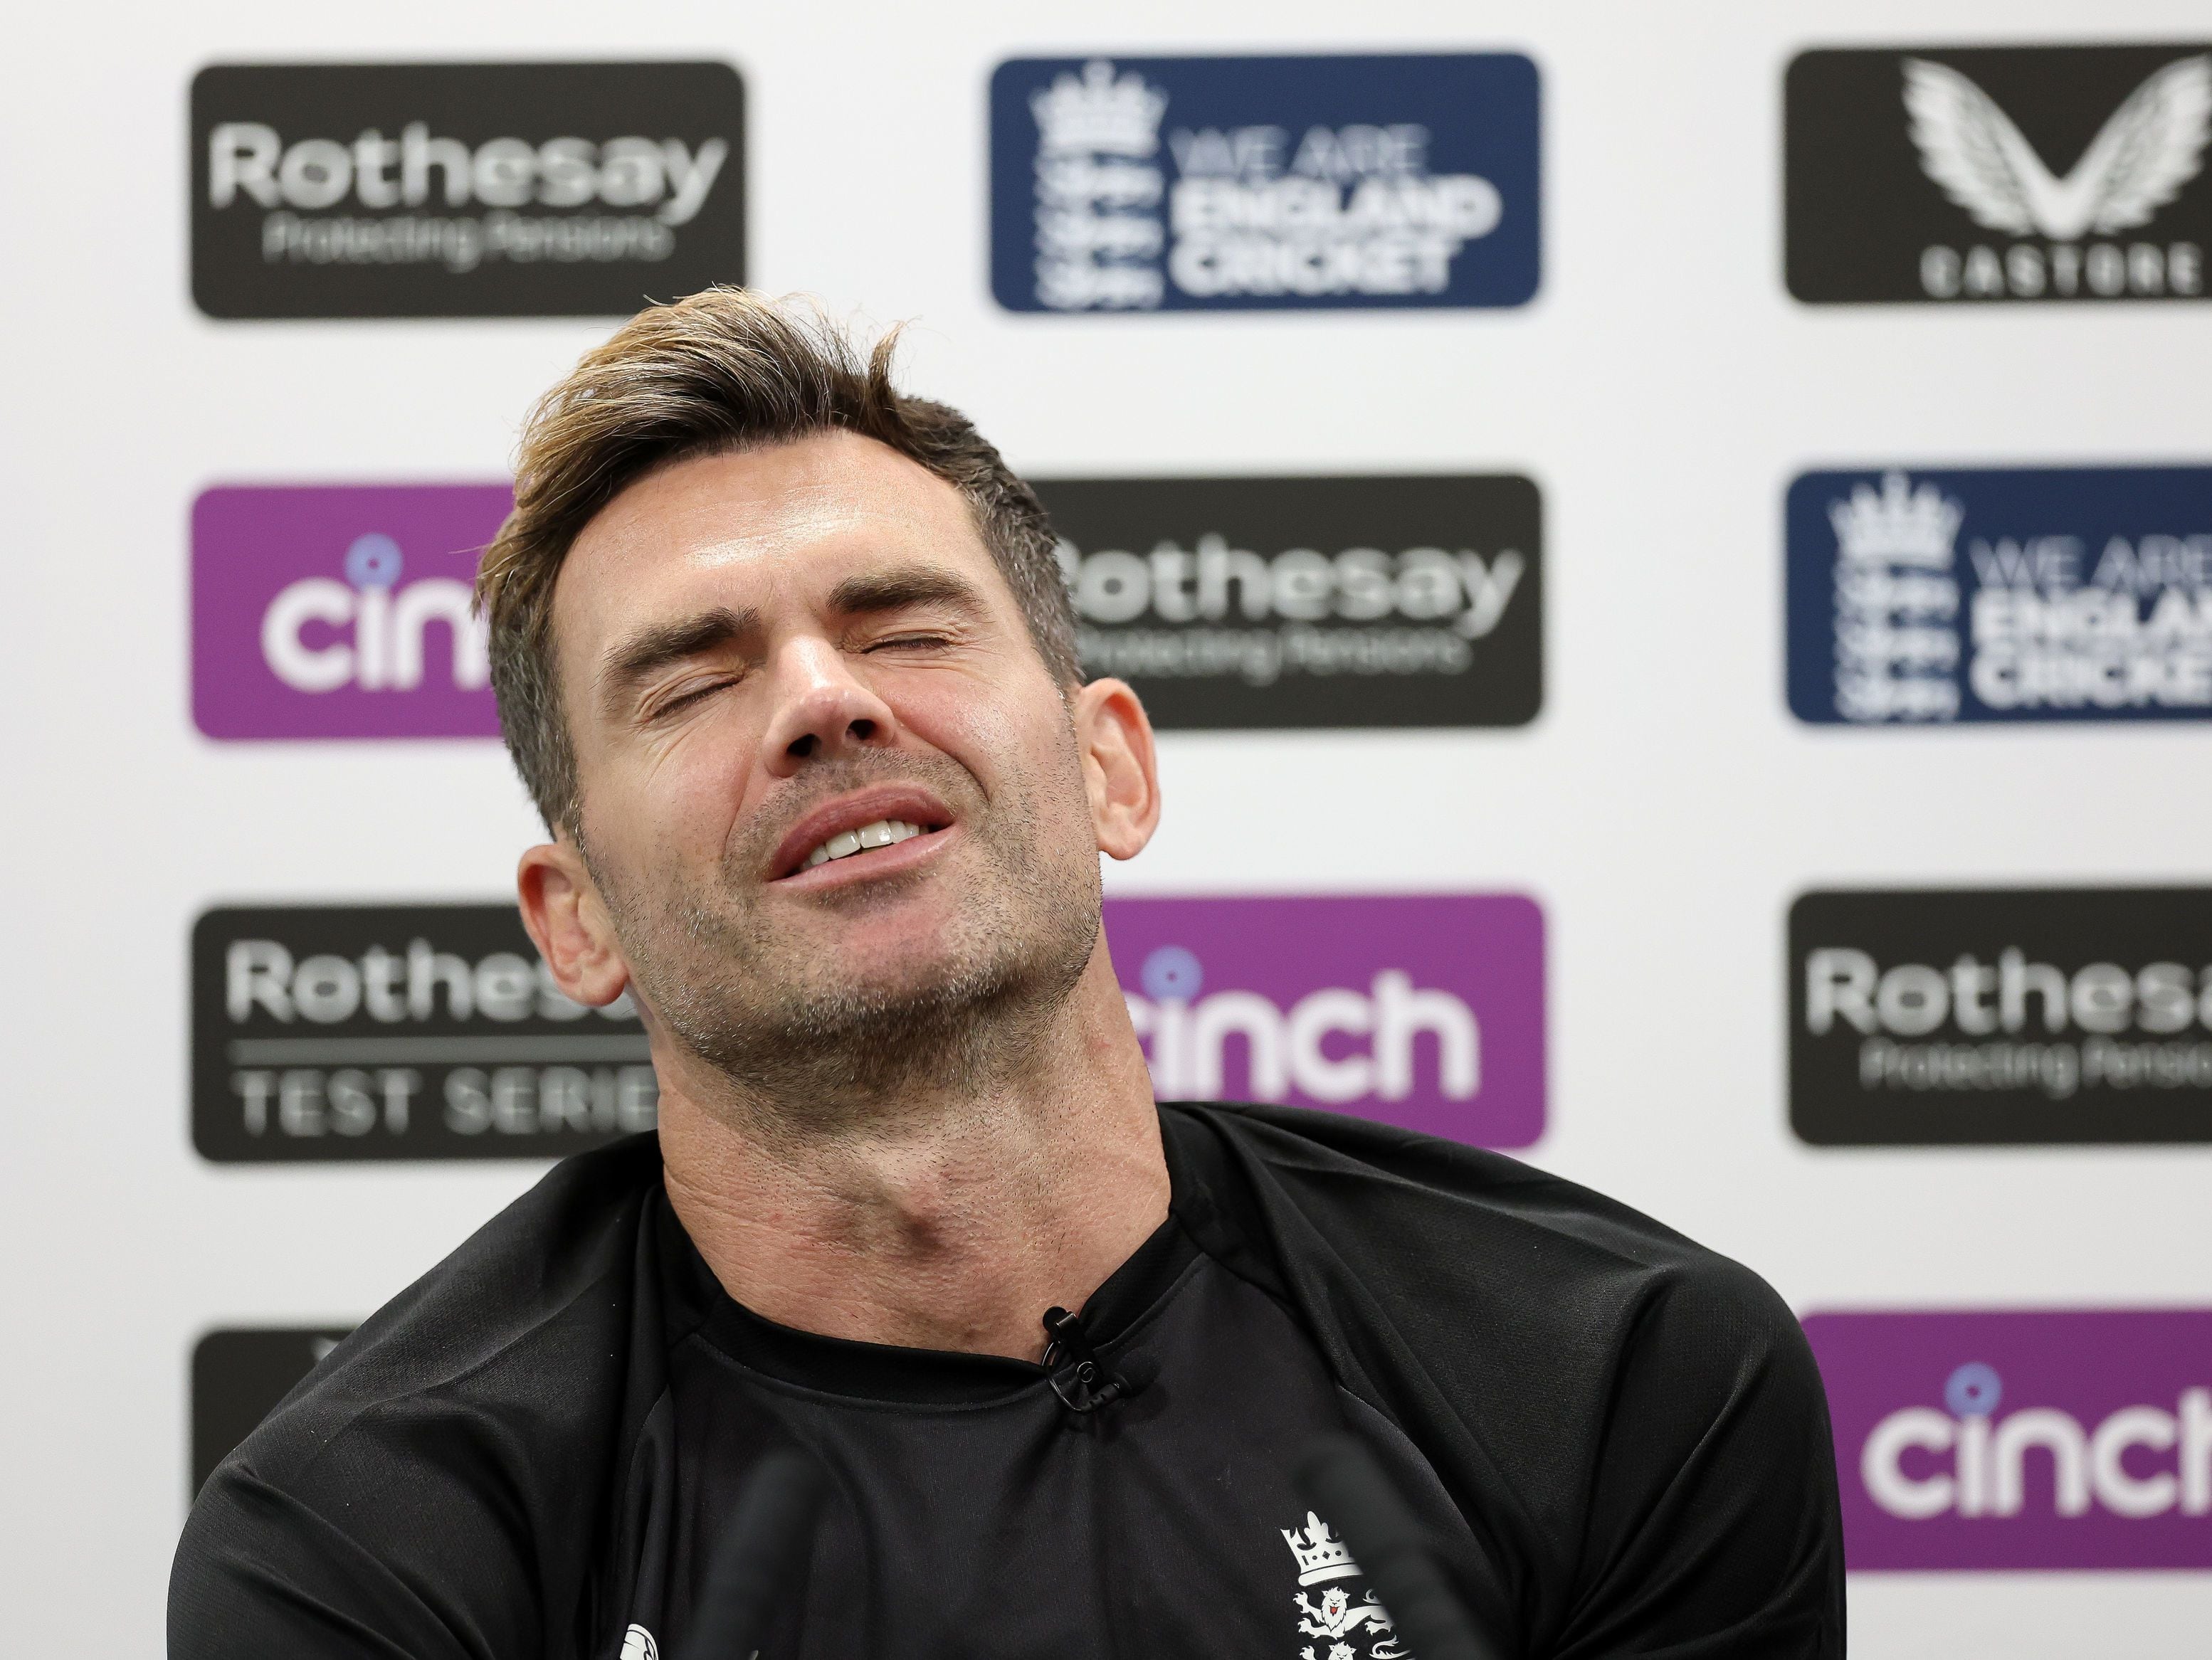 Jimmy Anderson trying to hold back tears ahead of England finale